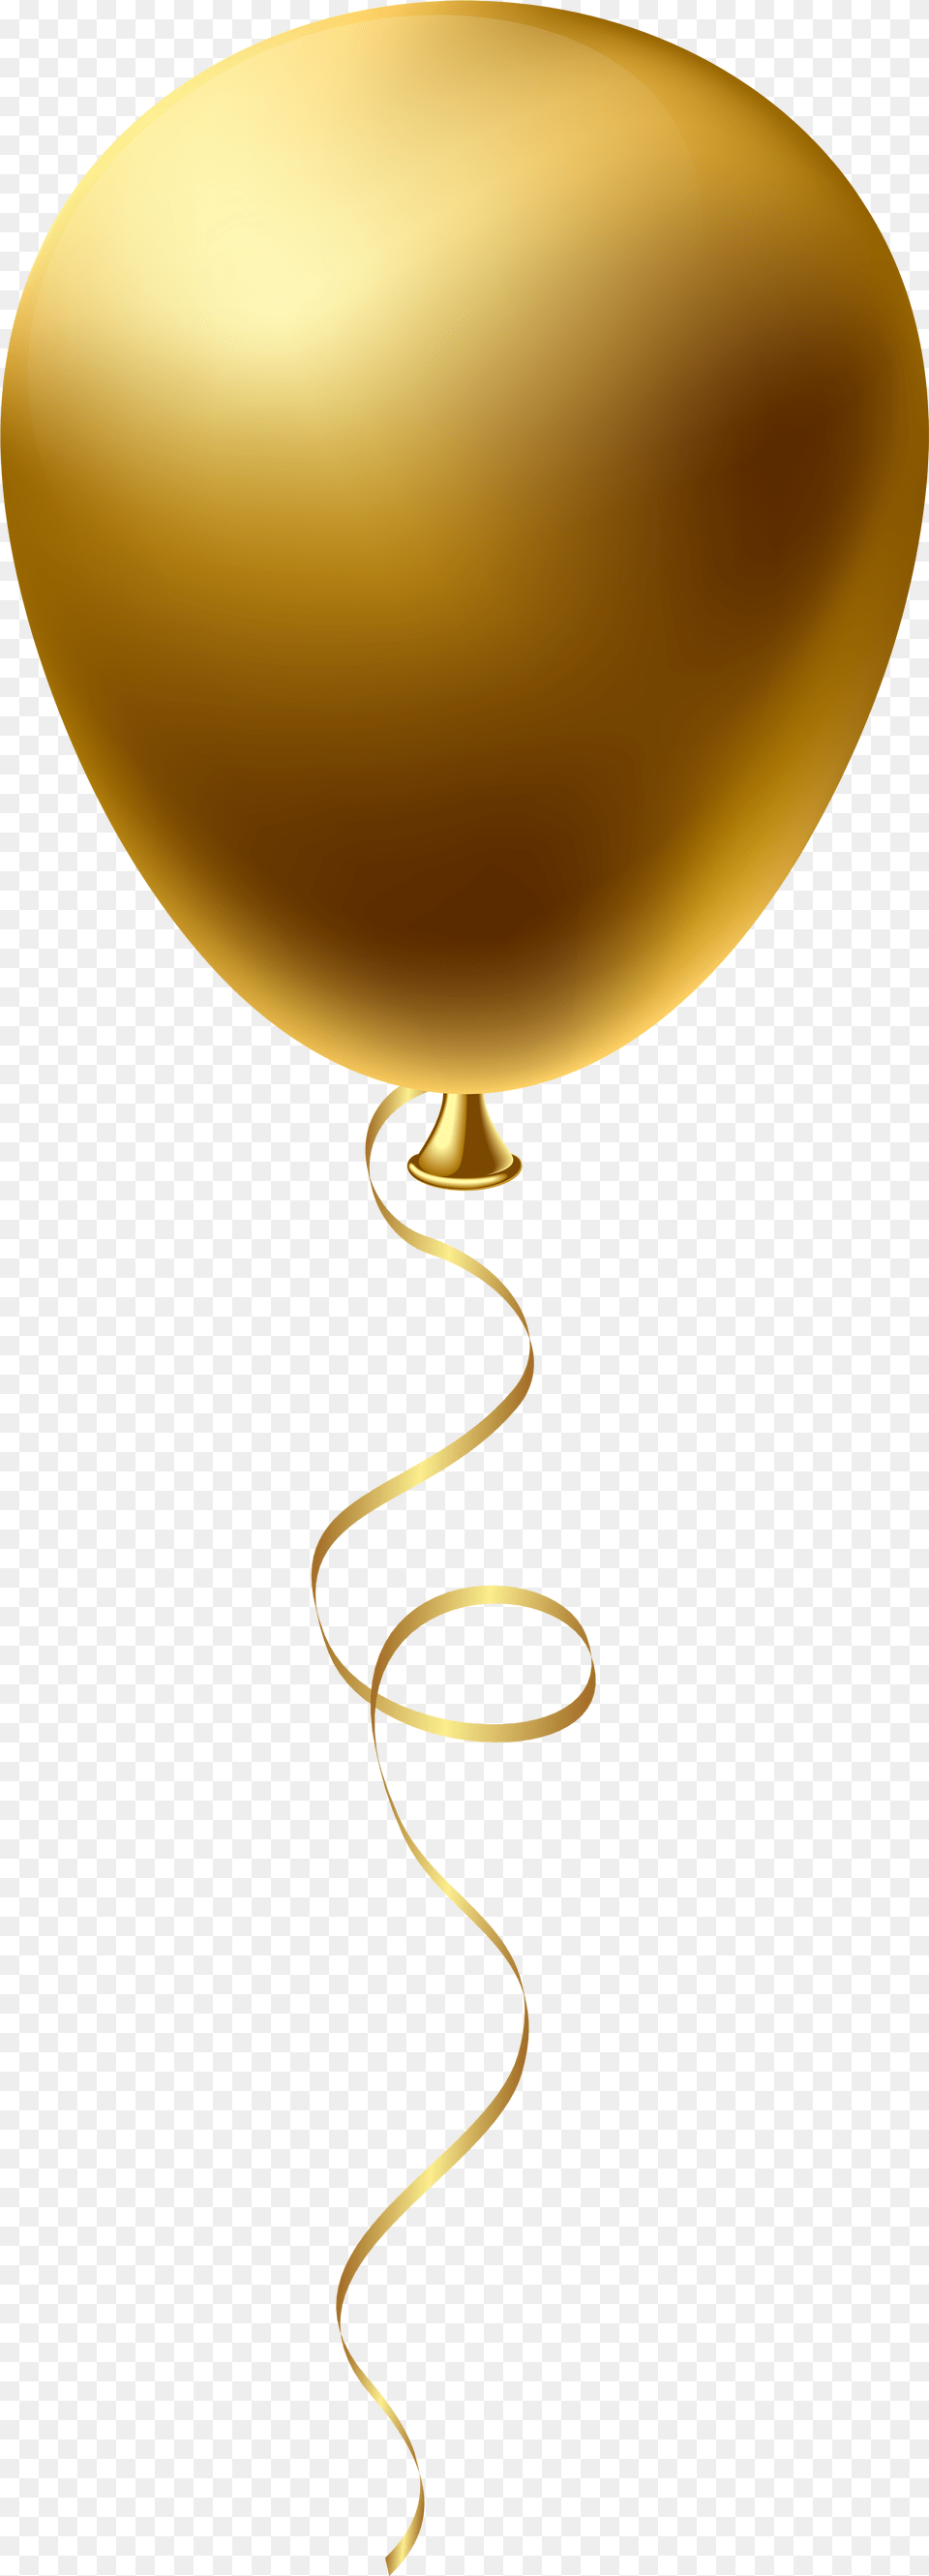 Download Gold Balloon Clip Balloon Gold, Lighting, Astronomy, Moon, Nature Free Transparent Png